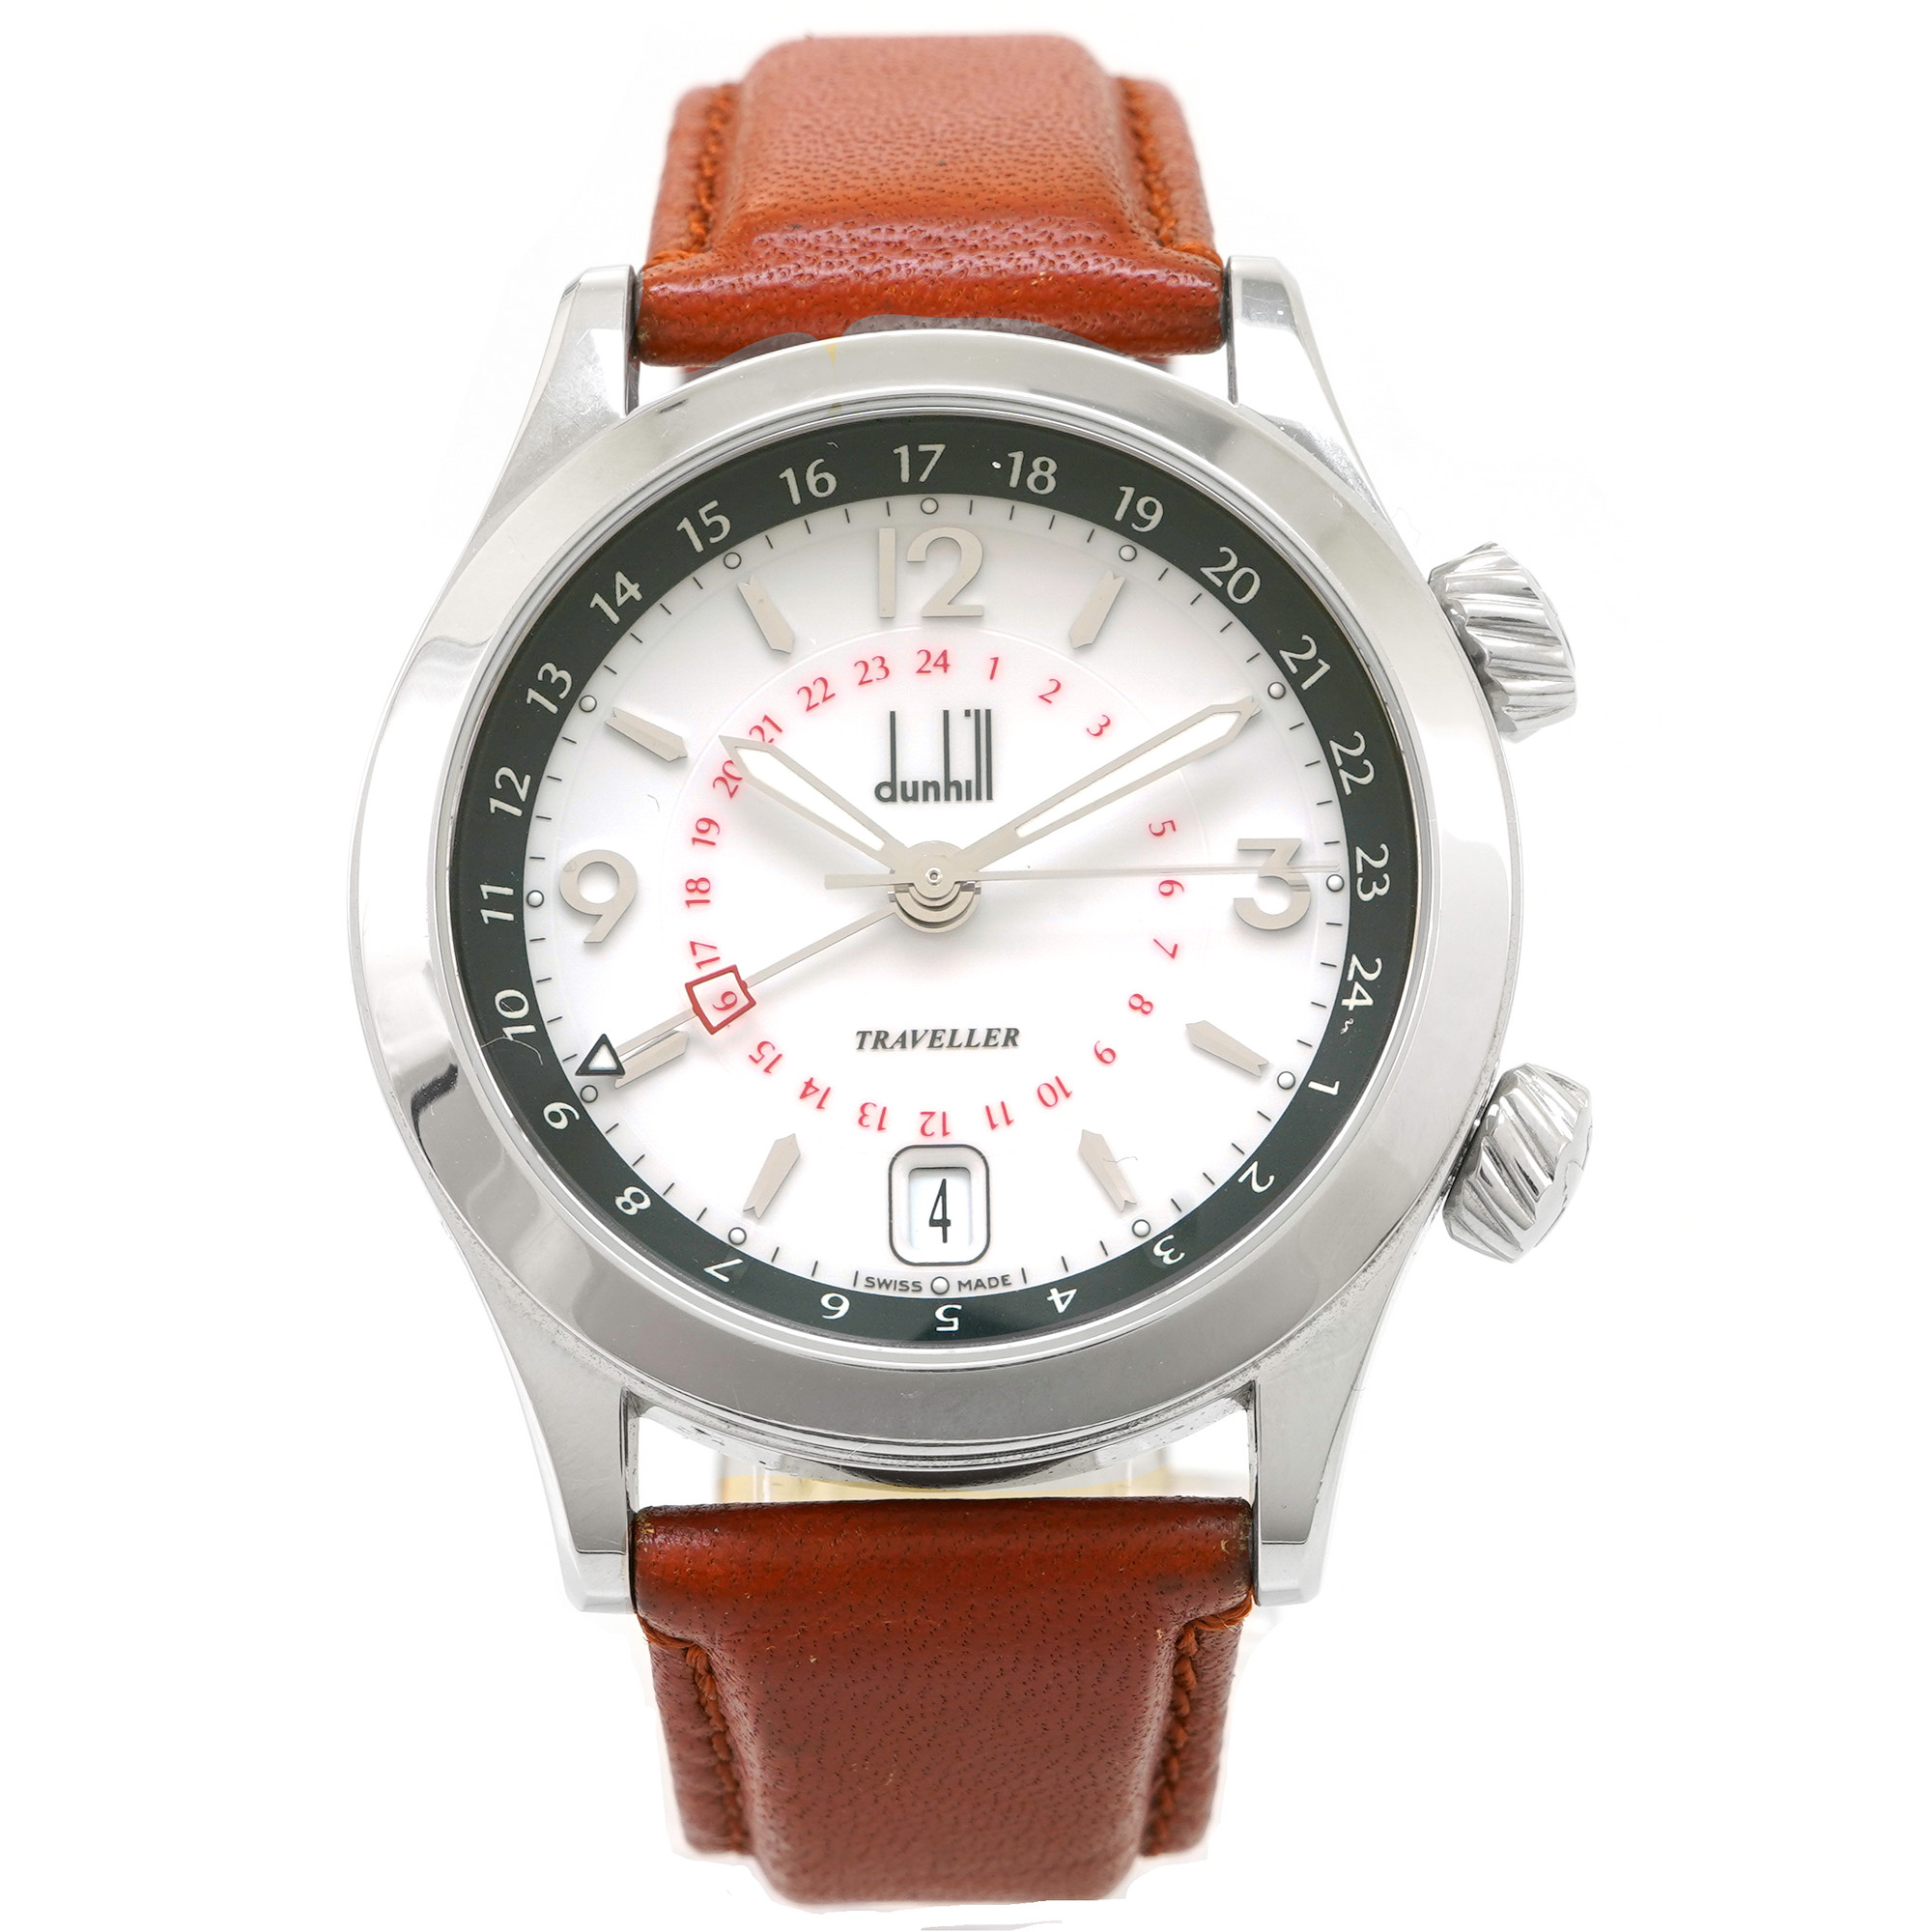 300Magazine - The Alfred Dunhill Bull Dog Watch: A True Mens Watch